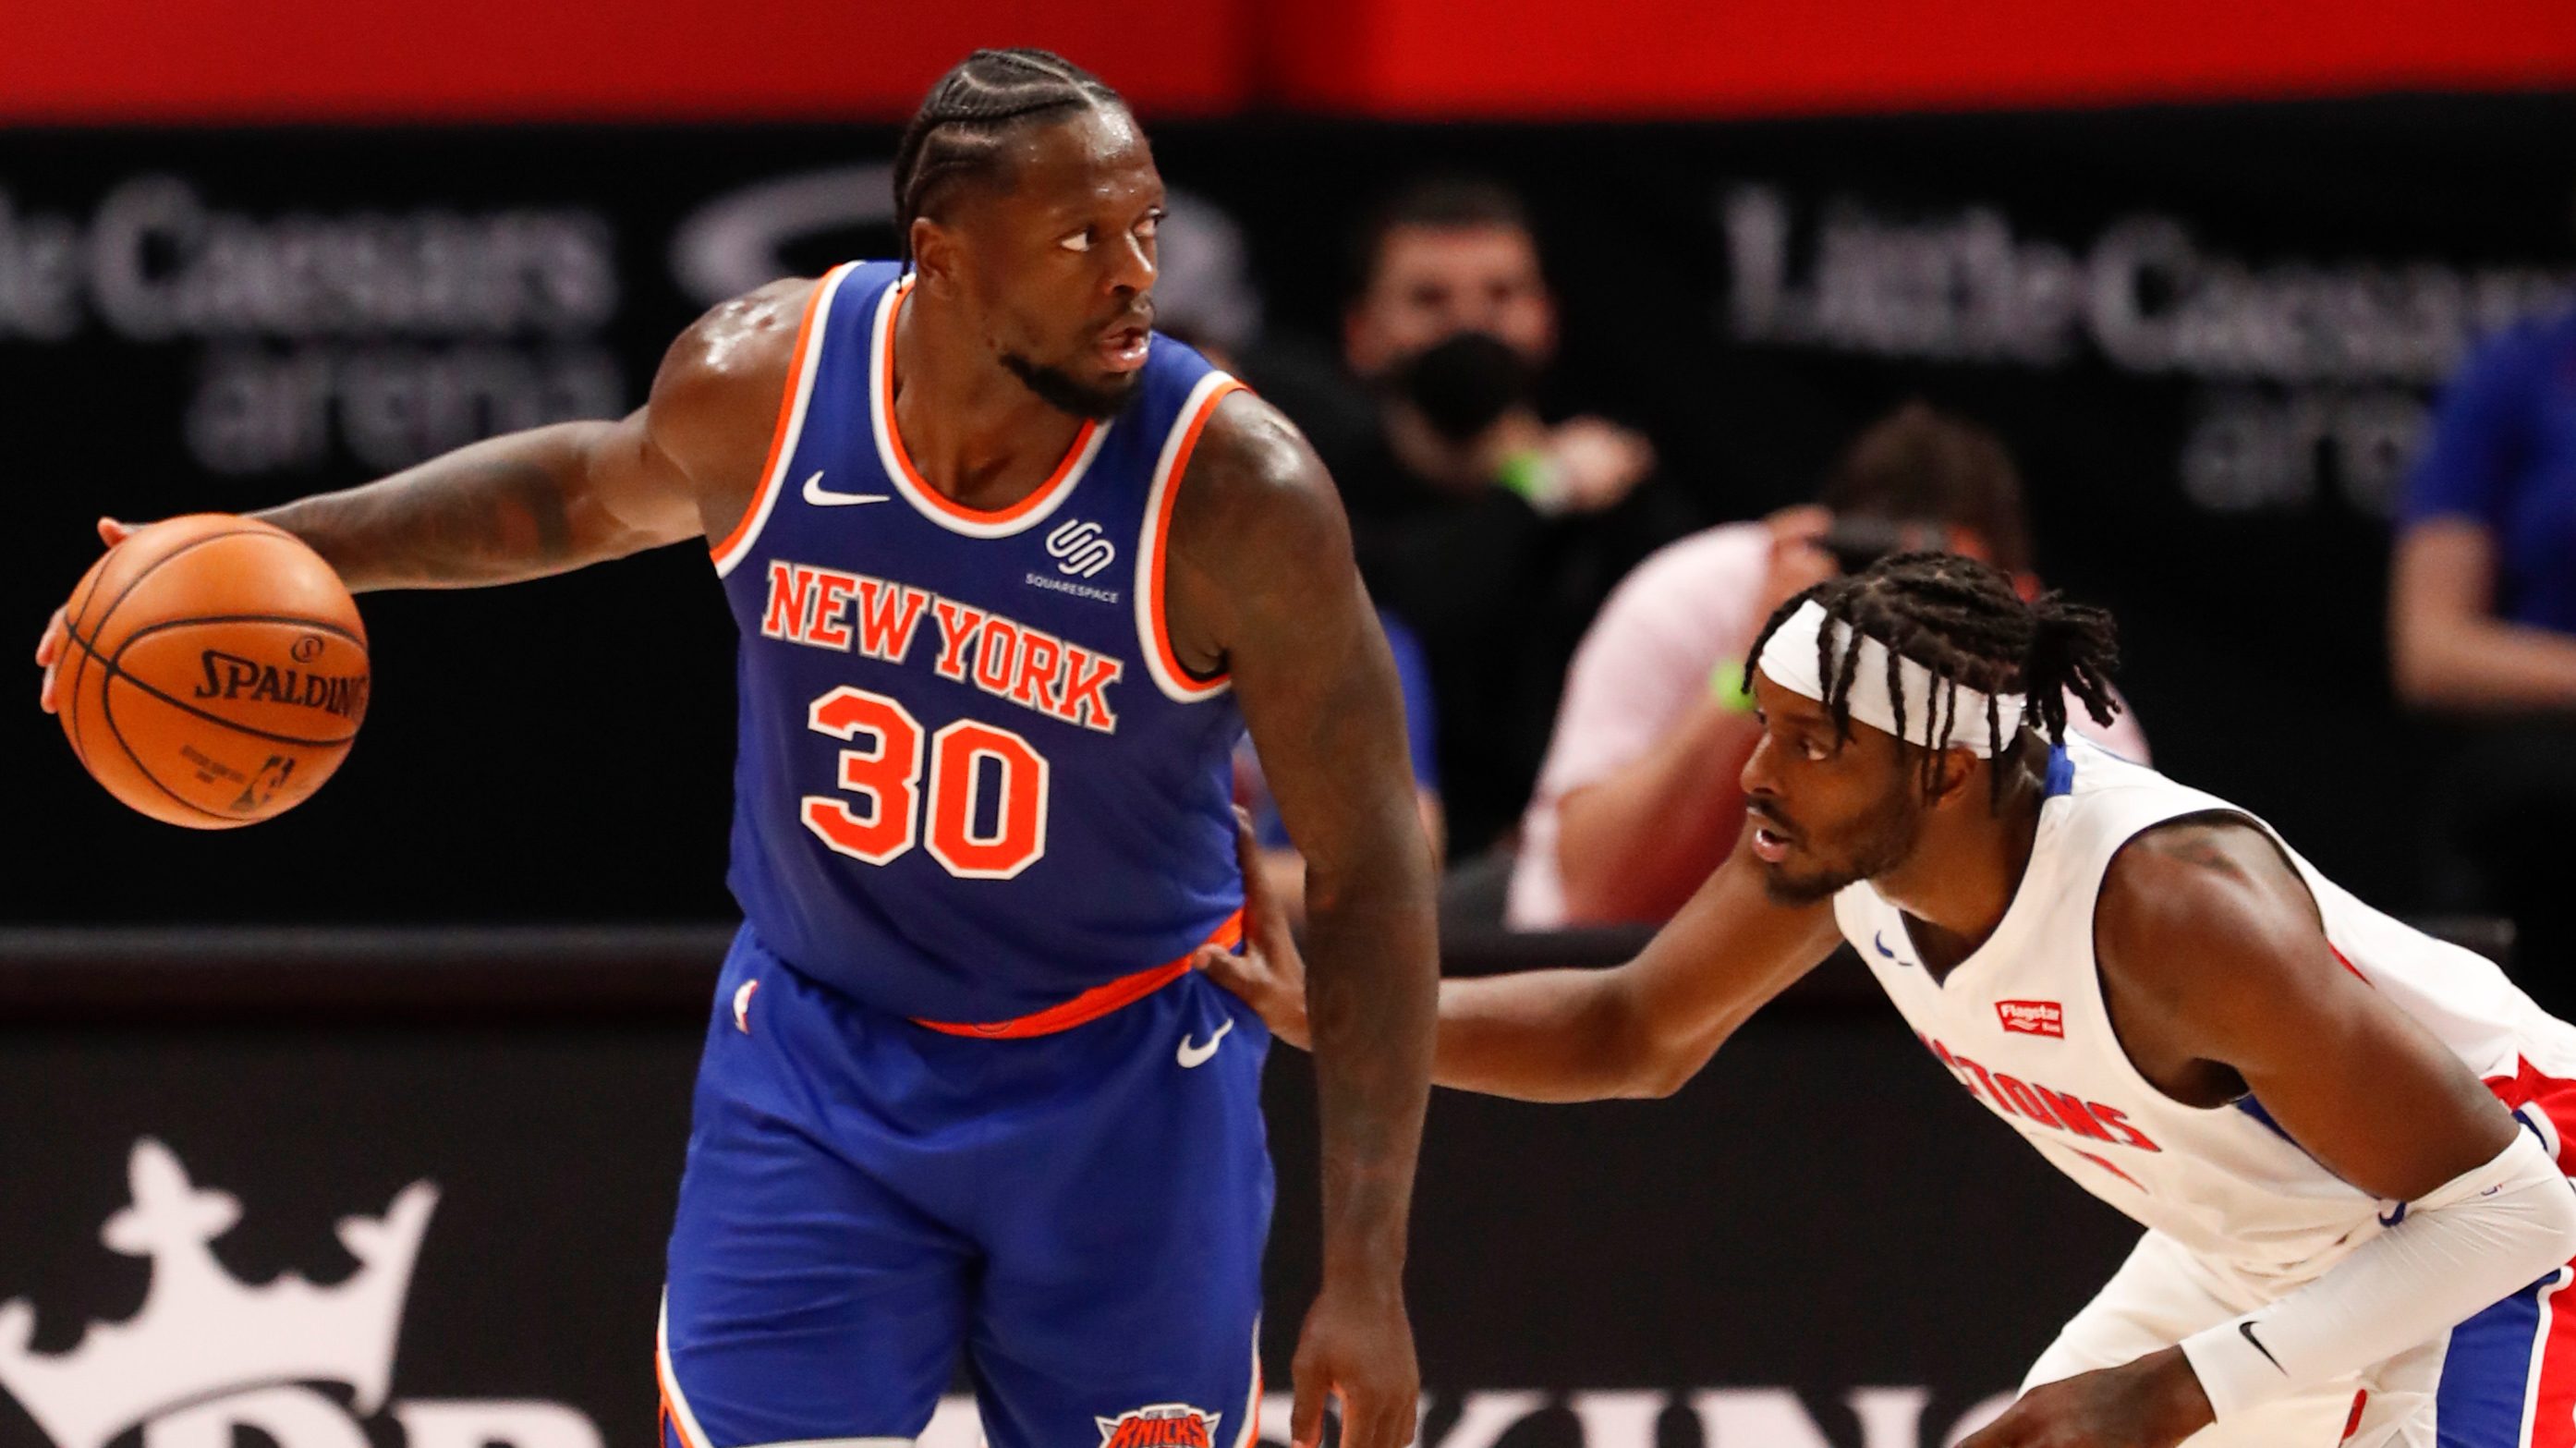 Knicks' Julius Randle Named to His First All-Star Team - The New York Times